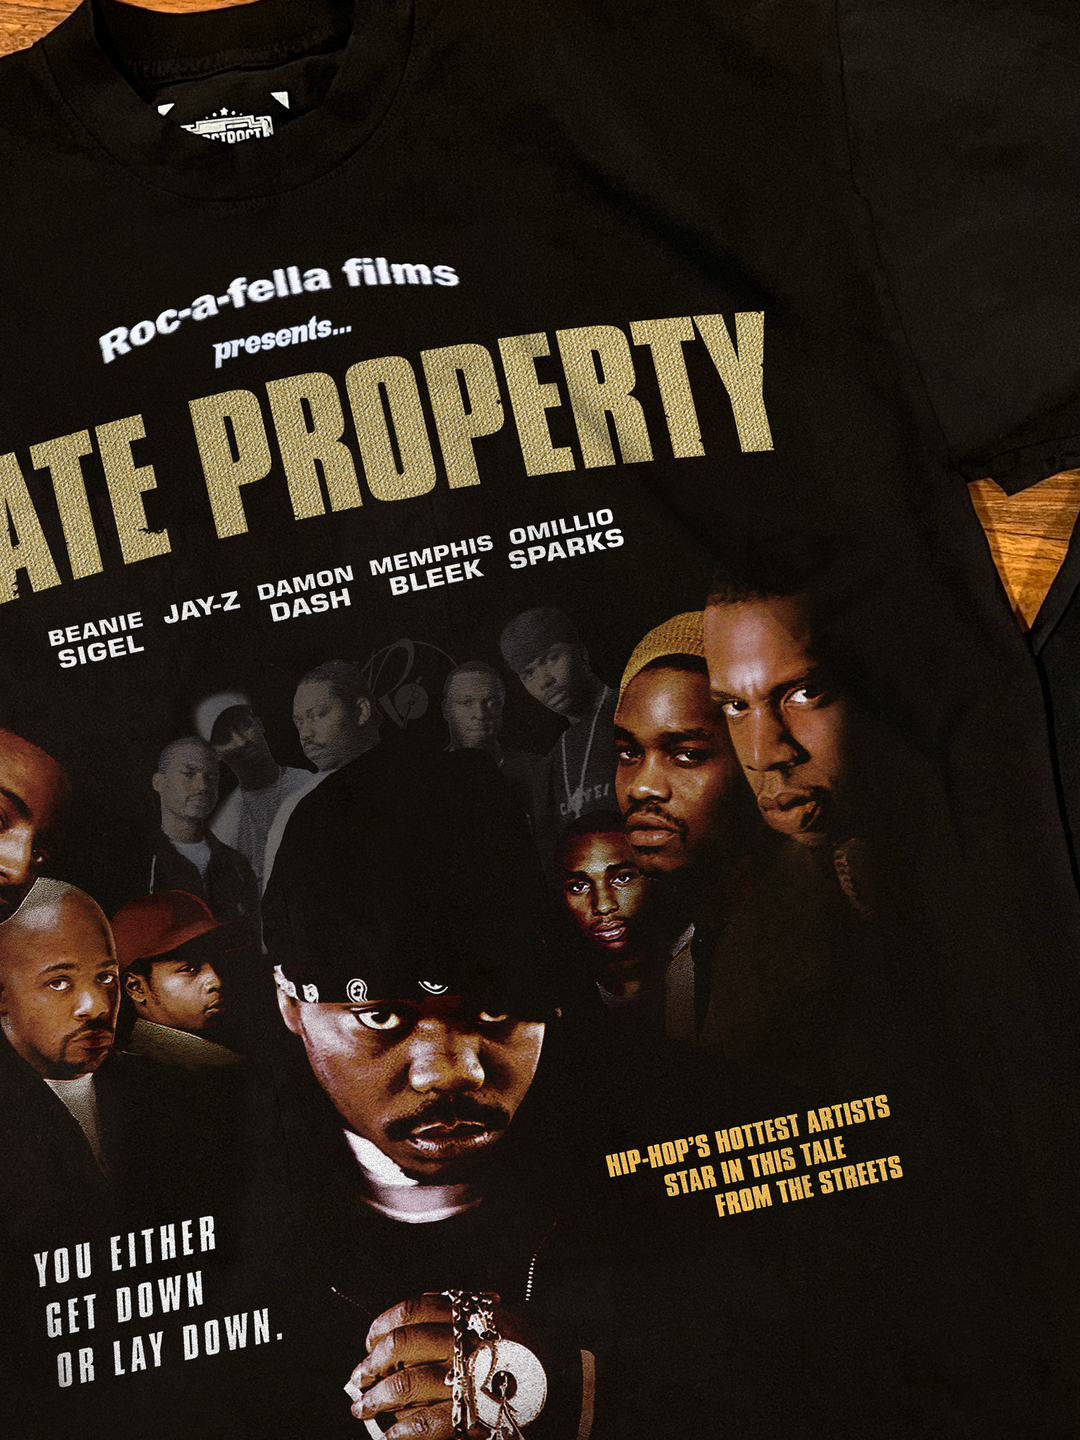 THE STATE PROPERTY TEE